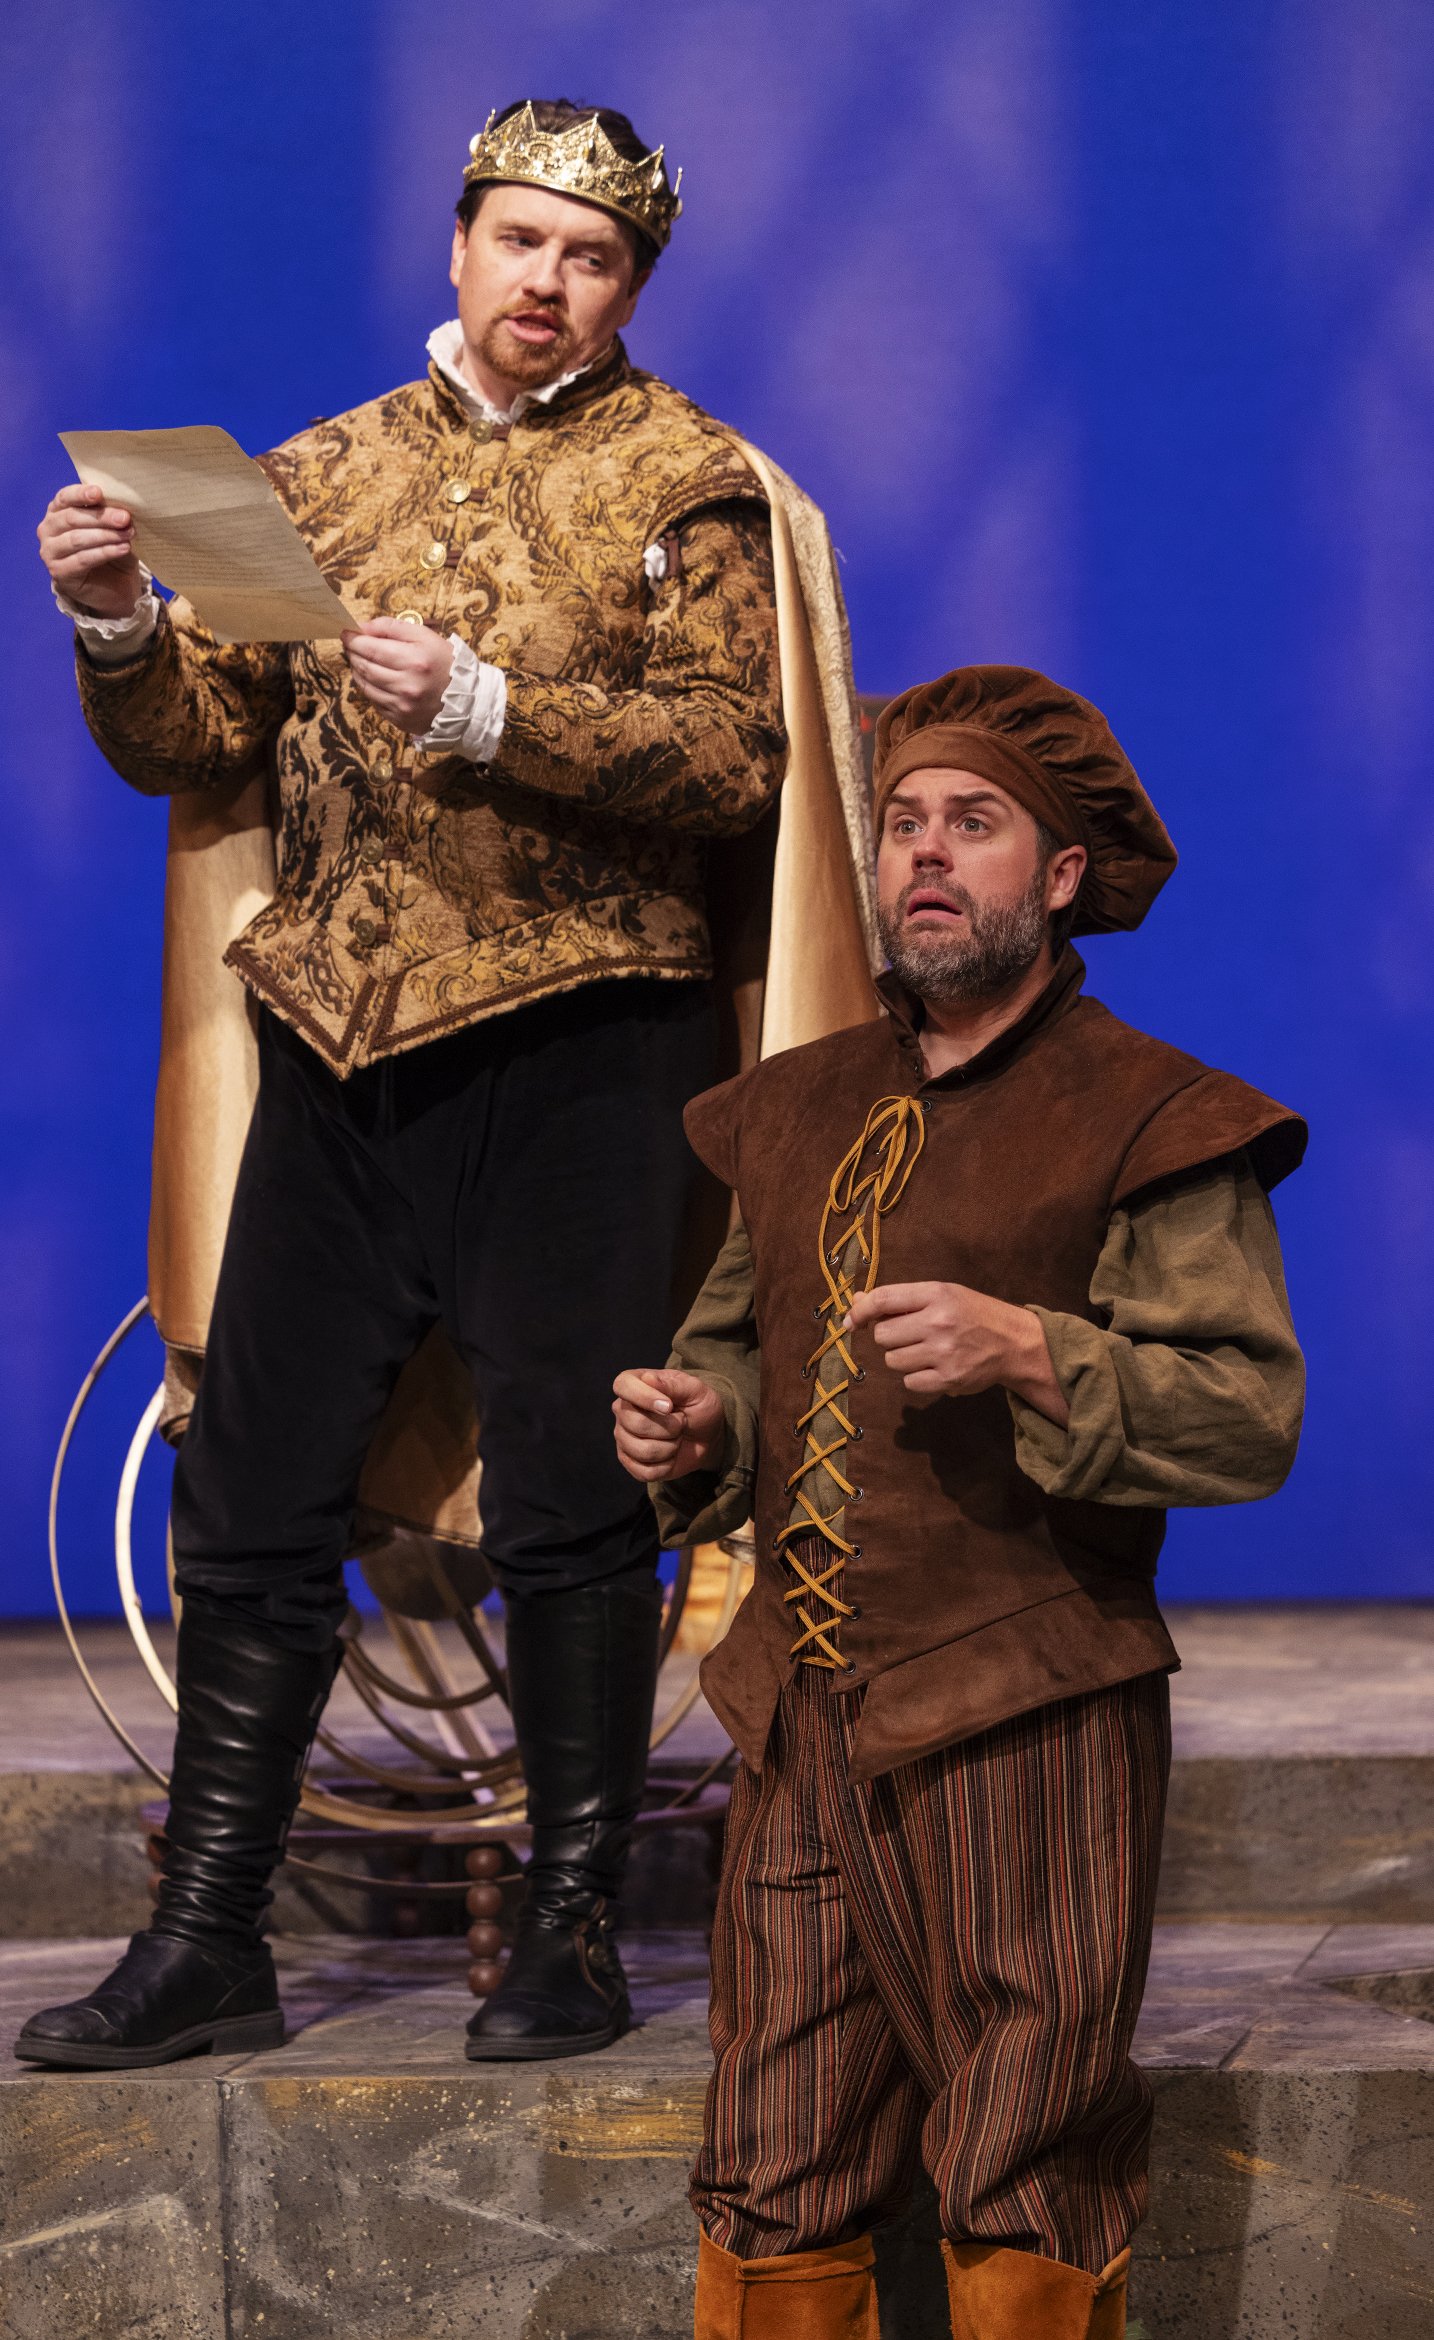 Aaron Shand as the King of Navarre and Evan Werner as Costard. Photo by Tim Fuller.